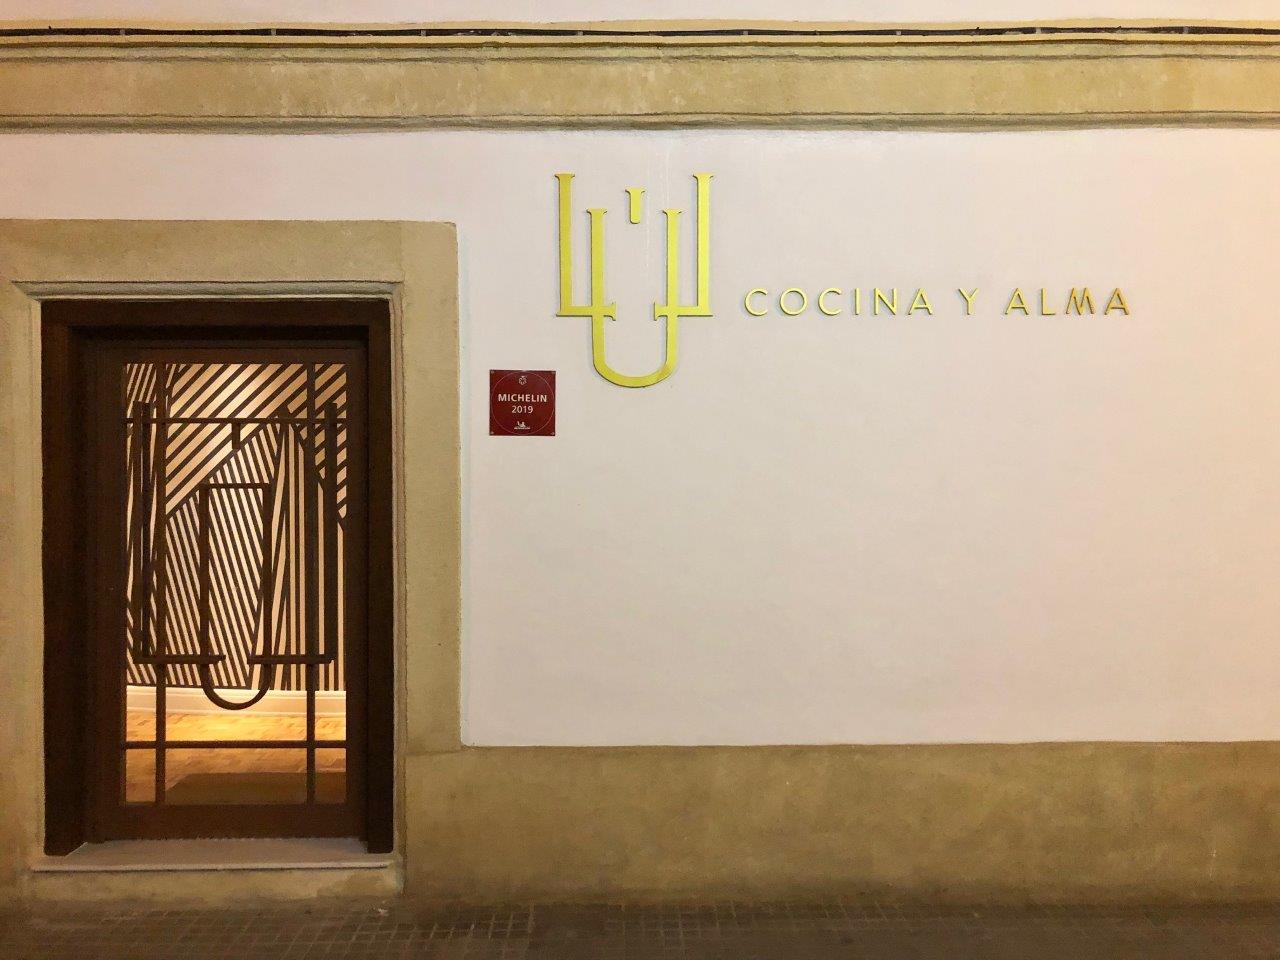 LU, Cocina y Alma, the Michelin-star Jerez restaurant where every guest sits at a chef?s table